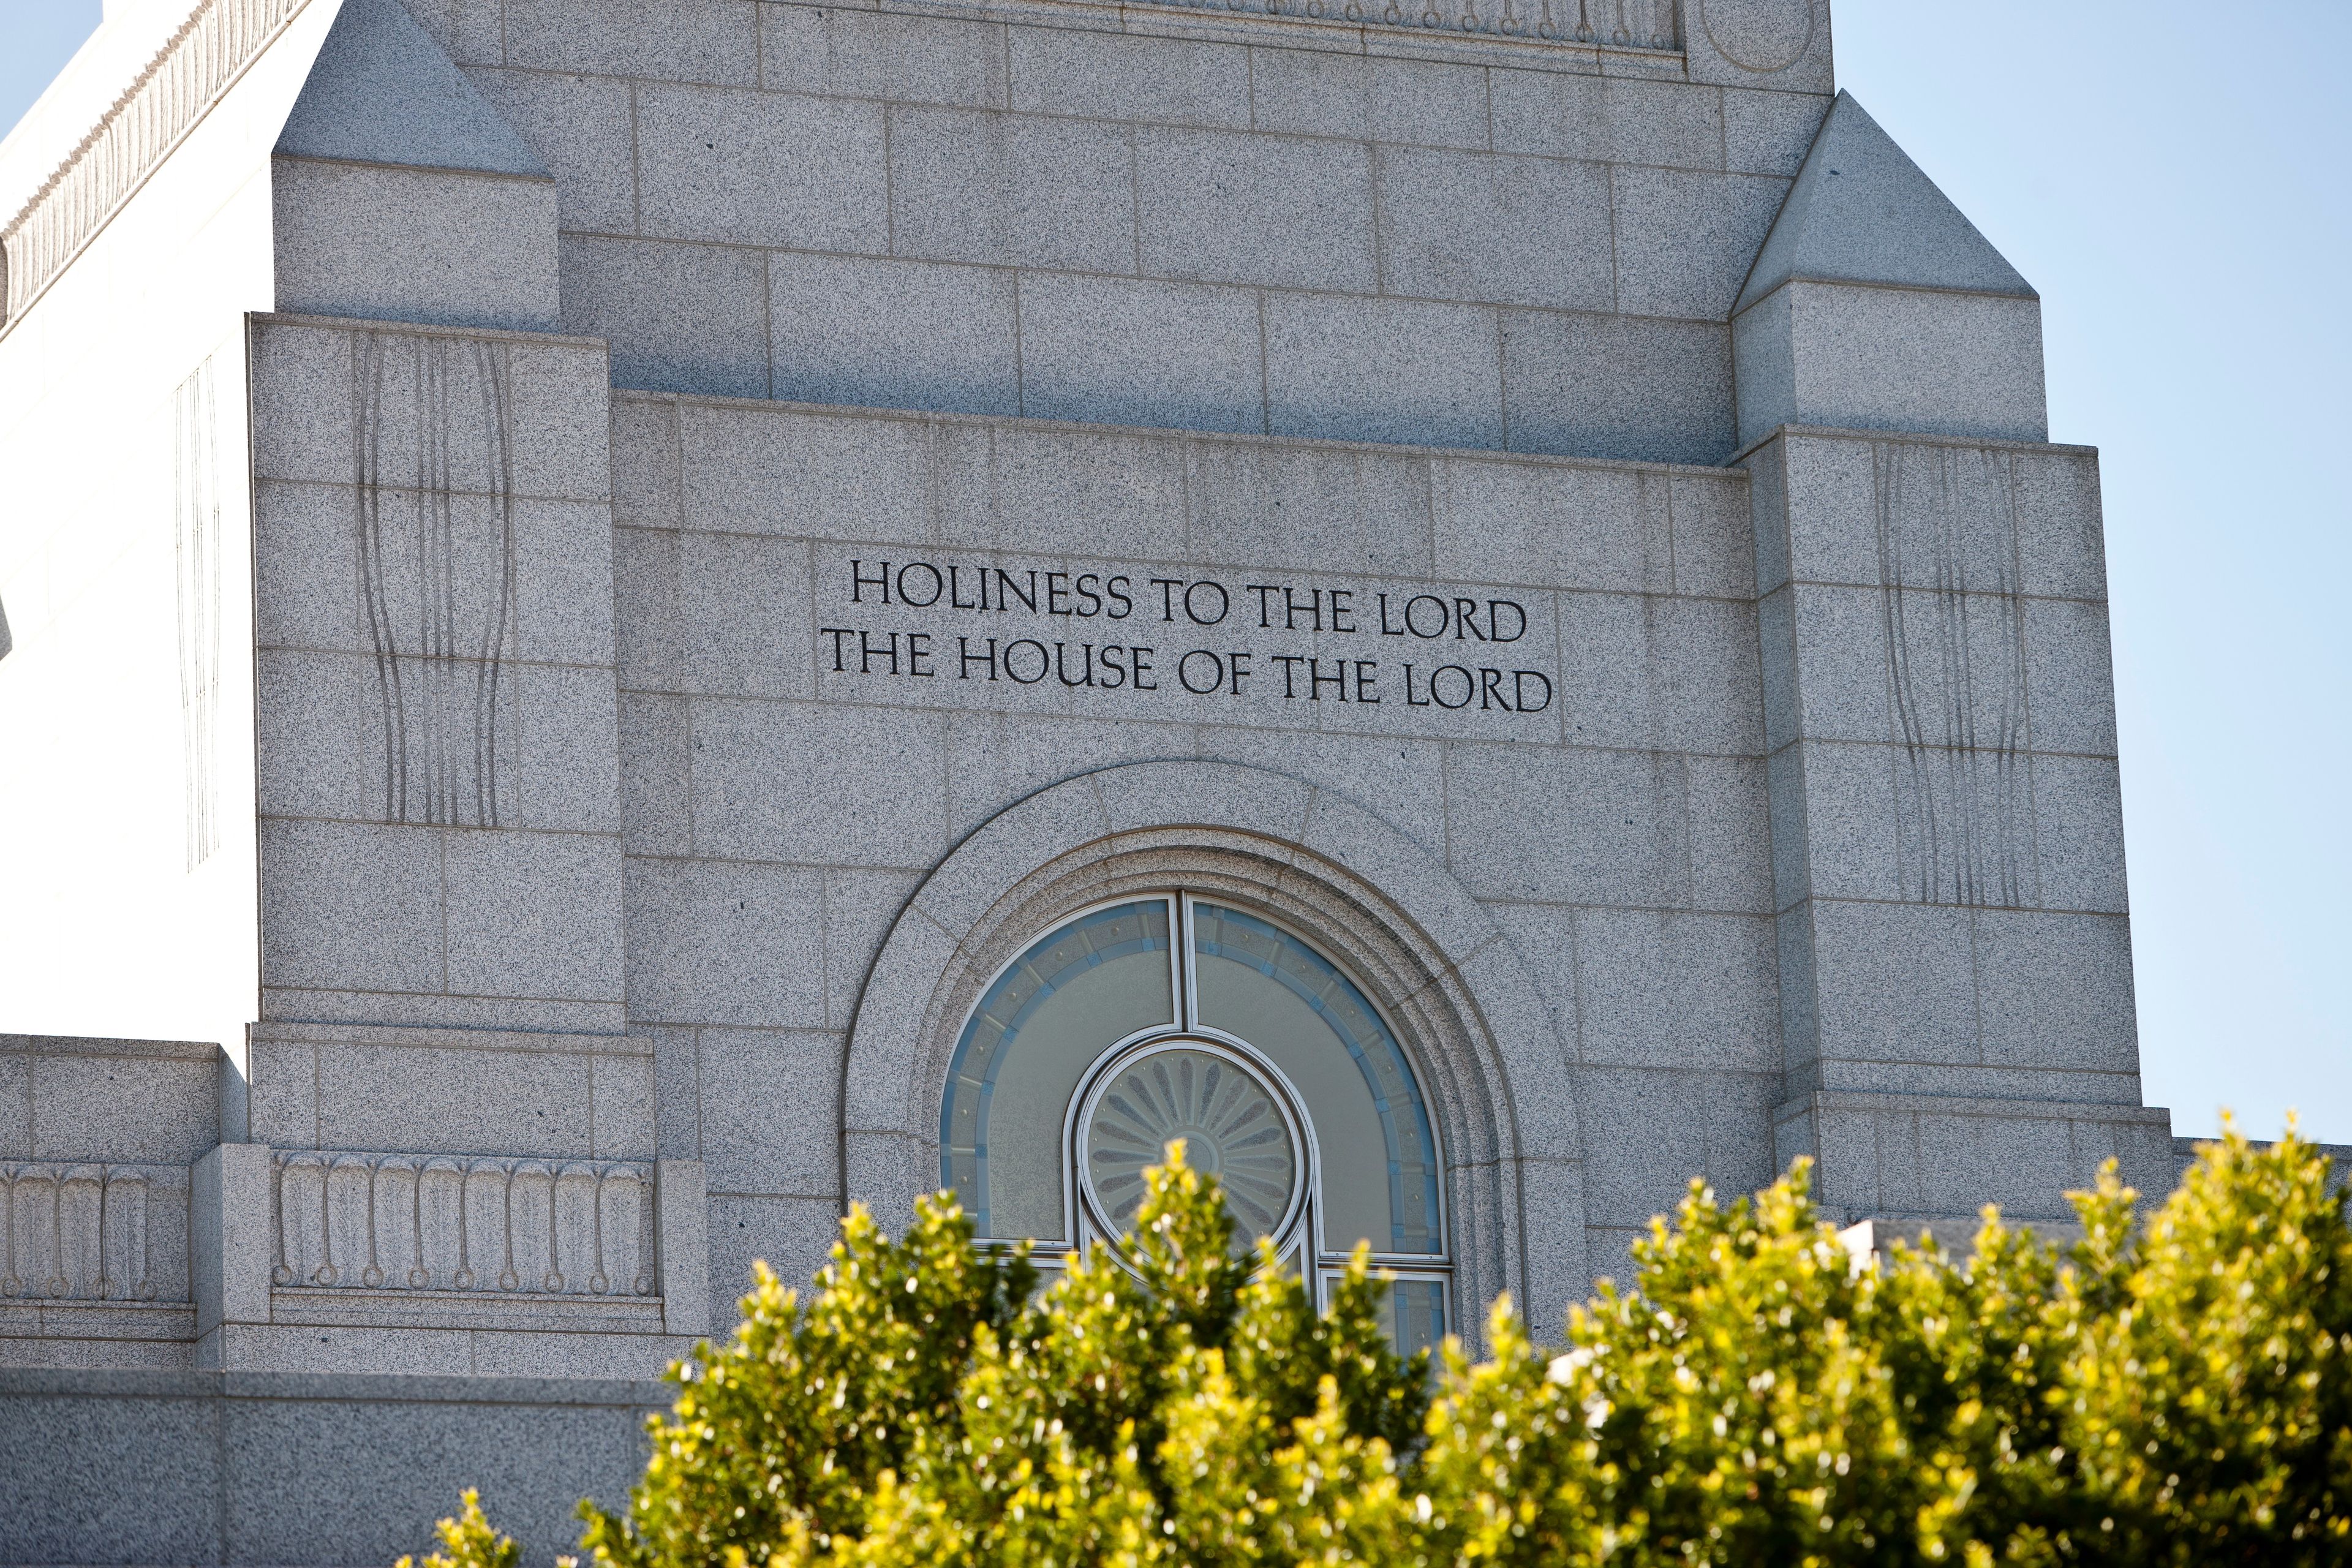 The Redlands California Temple inscription, “Holiness to the Lord: The House of the Lord,” including scenery.